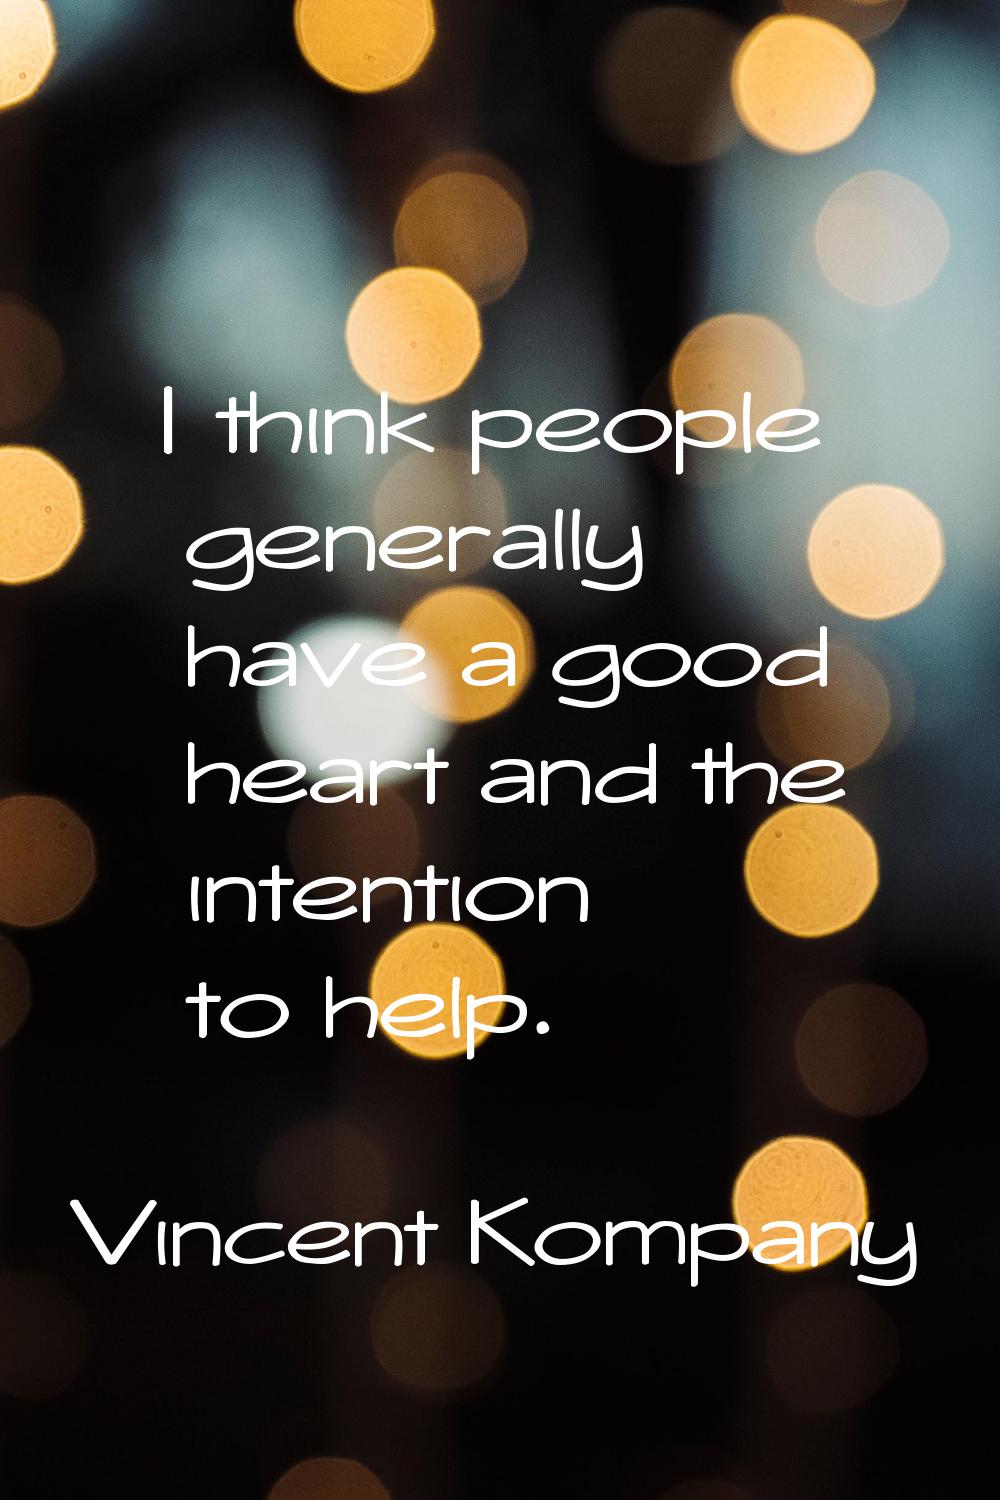 I think people generally have a good heart and the intention to help.